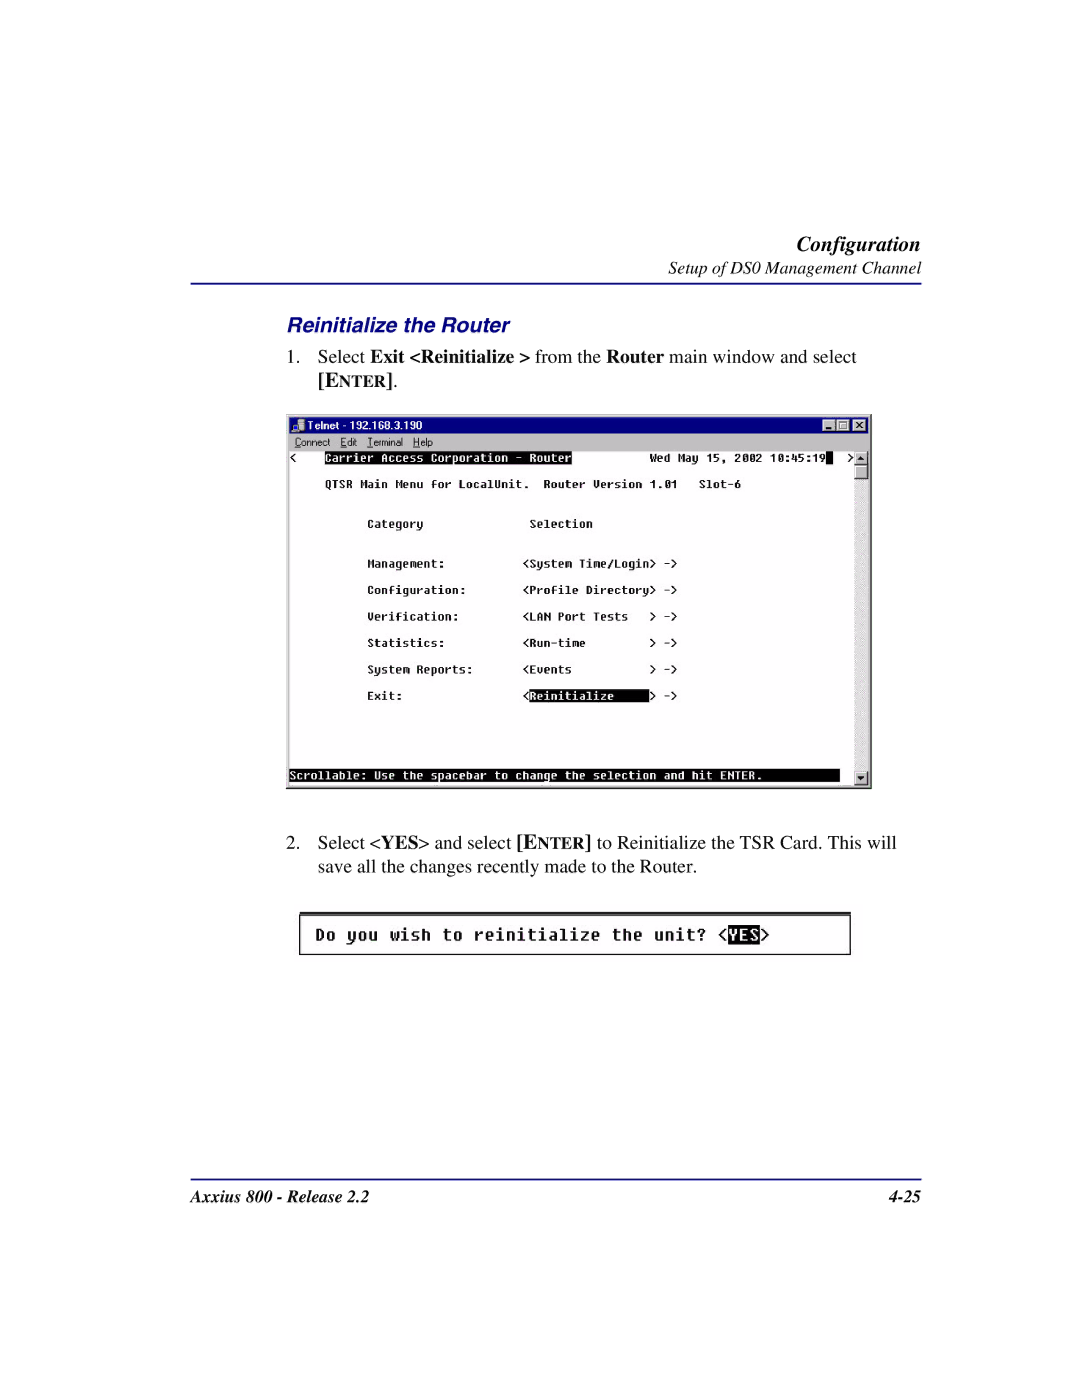 Carrier Access Axxius 800 user manual Reinitialize the Router 